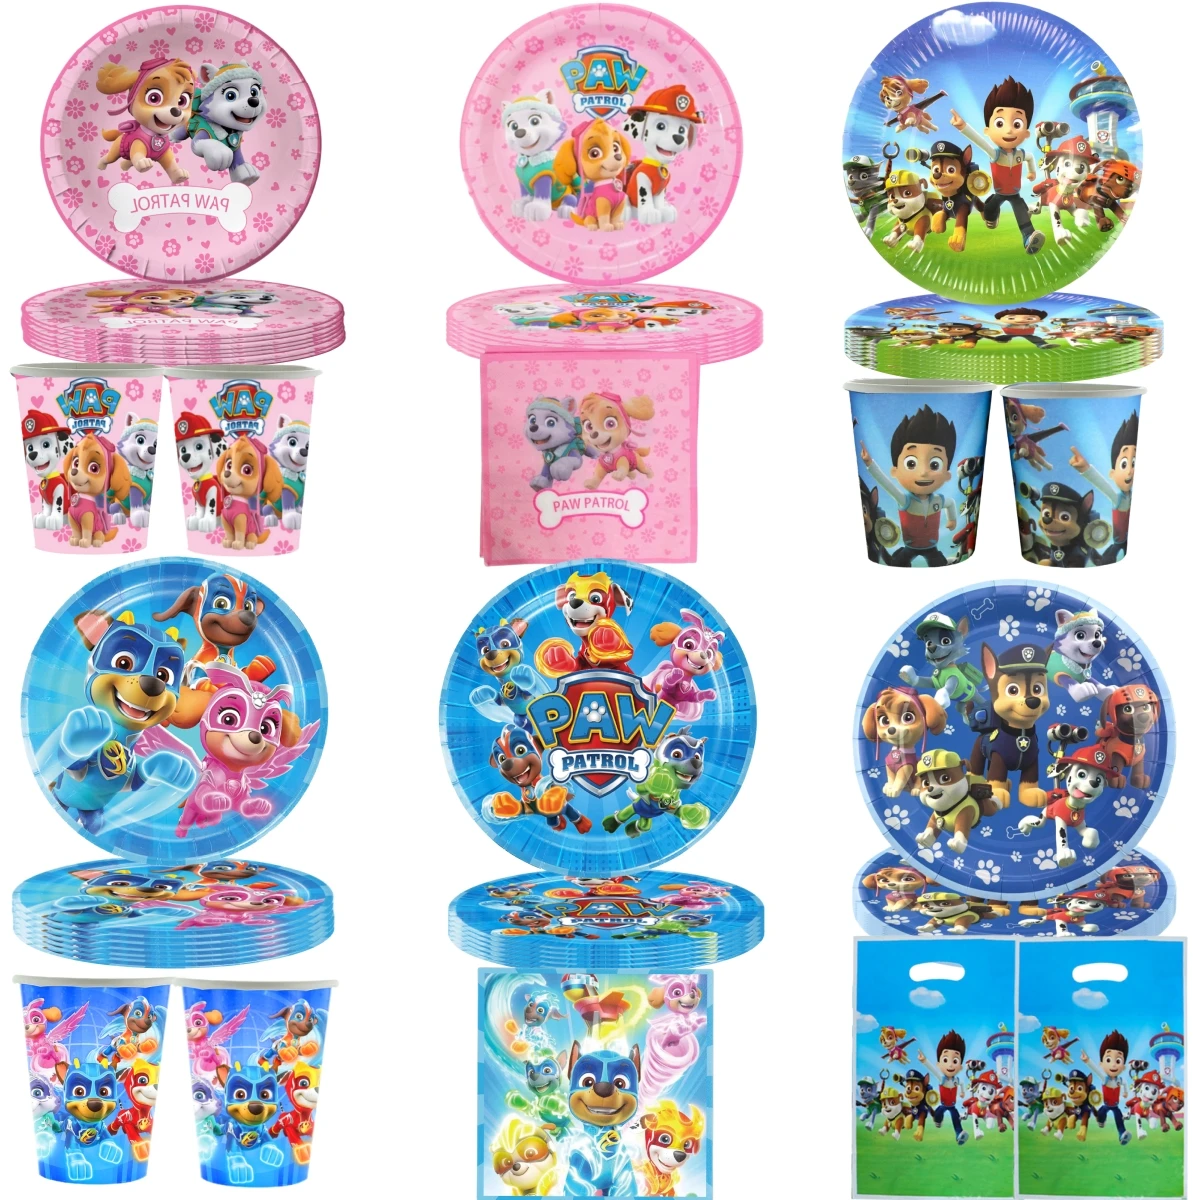 Paw Patrol Birthday Party Decor Disposable Tableware Tablecloth Cup Plate Napkin Dog Gift Bag Baby Shower Kid DIY Party Supplies 81pcs cartoon dog theme kids birthday party decorations disposable paper cup napkin plate baby shower supplies gift bags